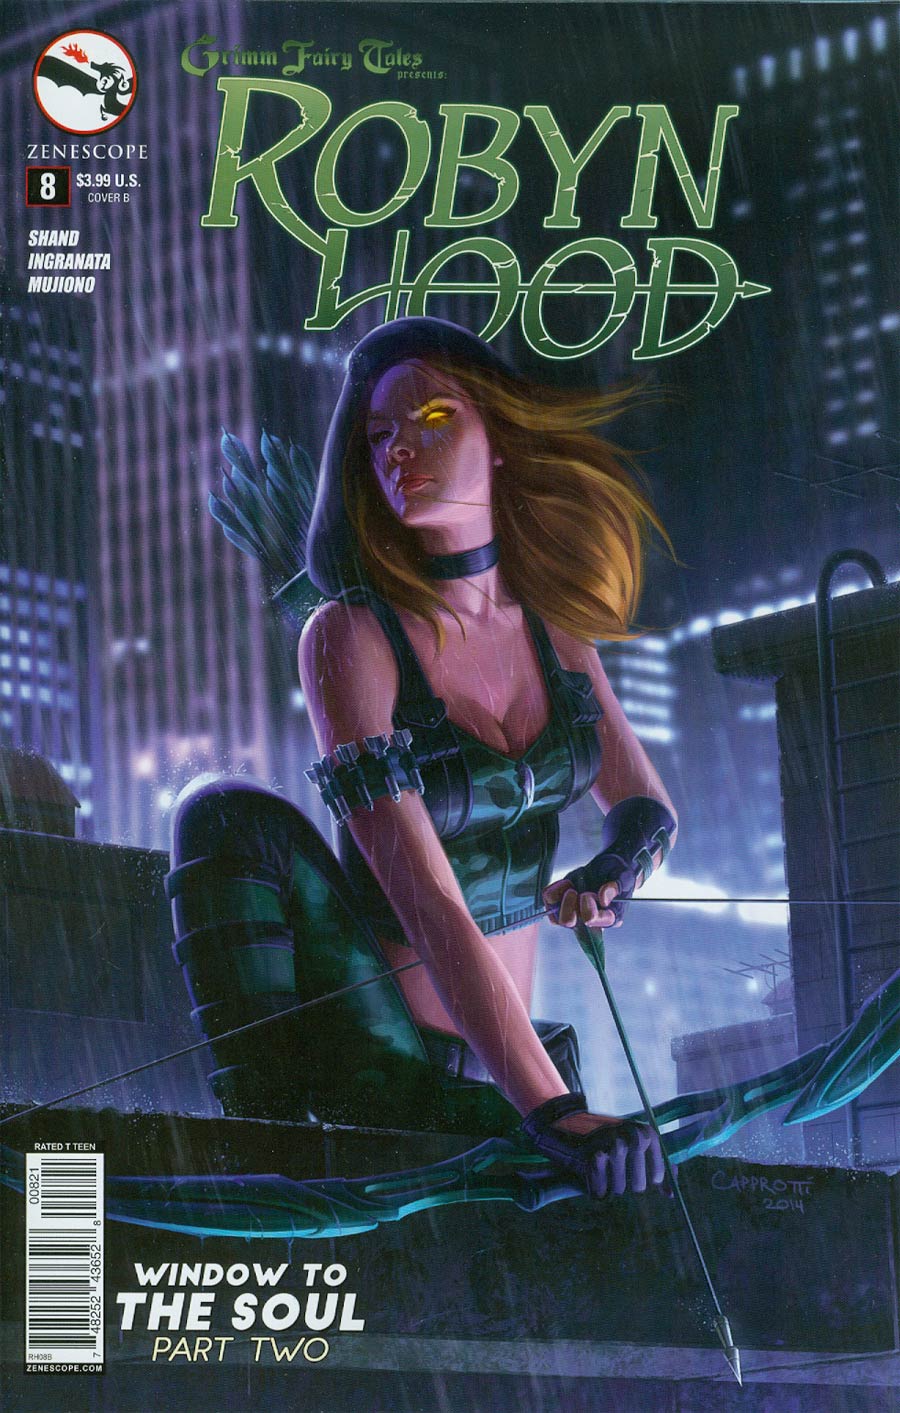 Grimm Fairy Tales Presents Robyn Hood Vol 2 #8 Cover B Mike Capprotti